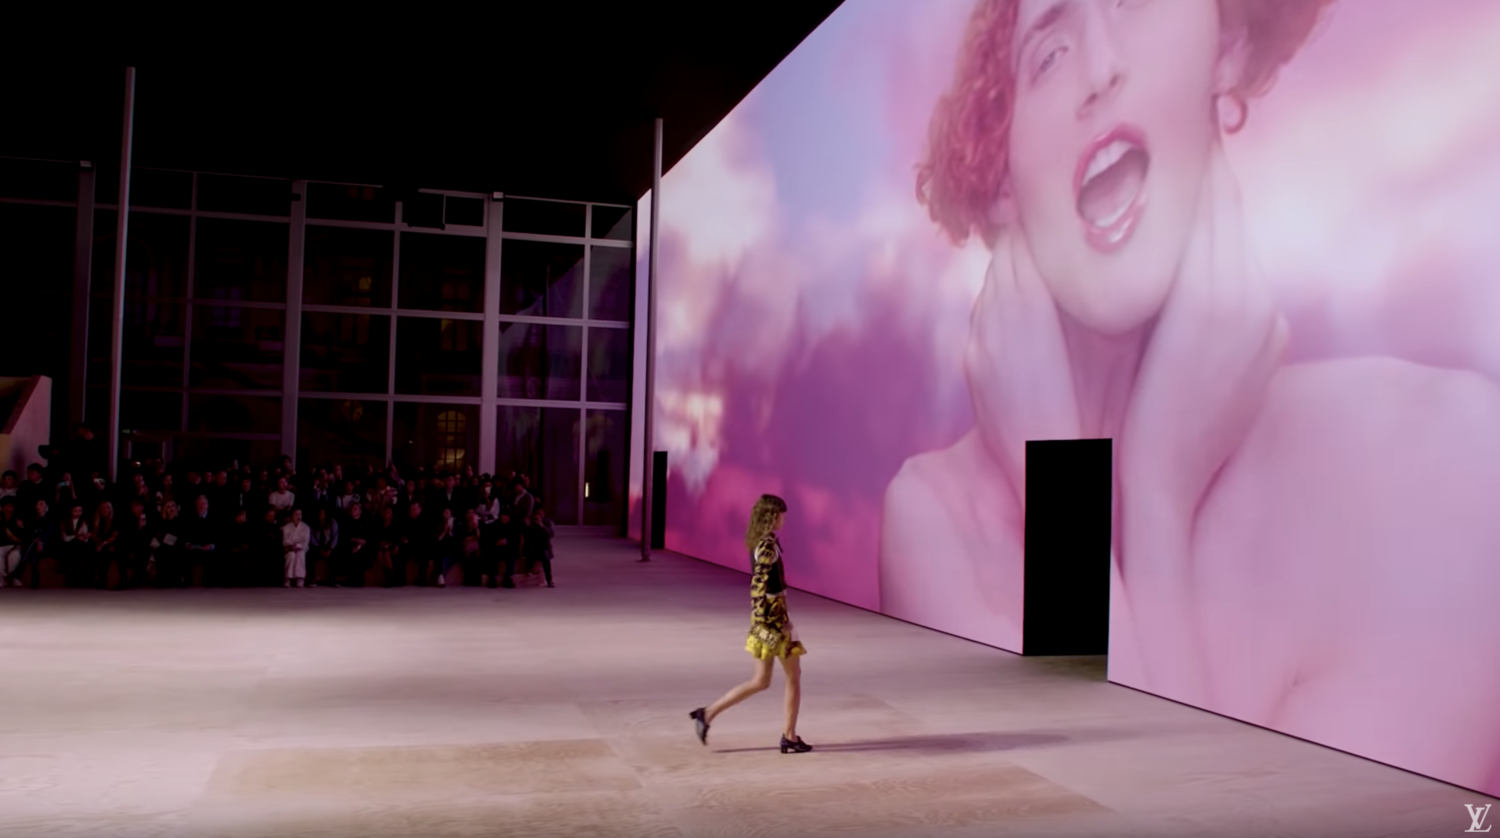 SOPHIE Closed Fashion Month at Louis Vuitton Spring 2020 - PAPER Magazine